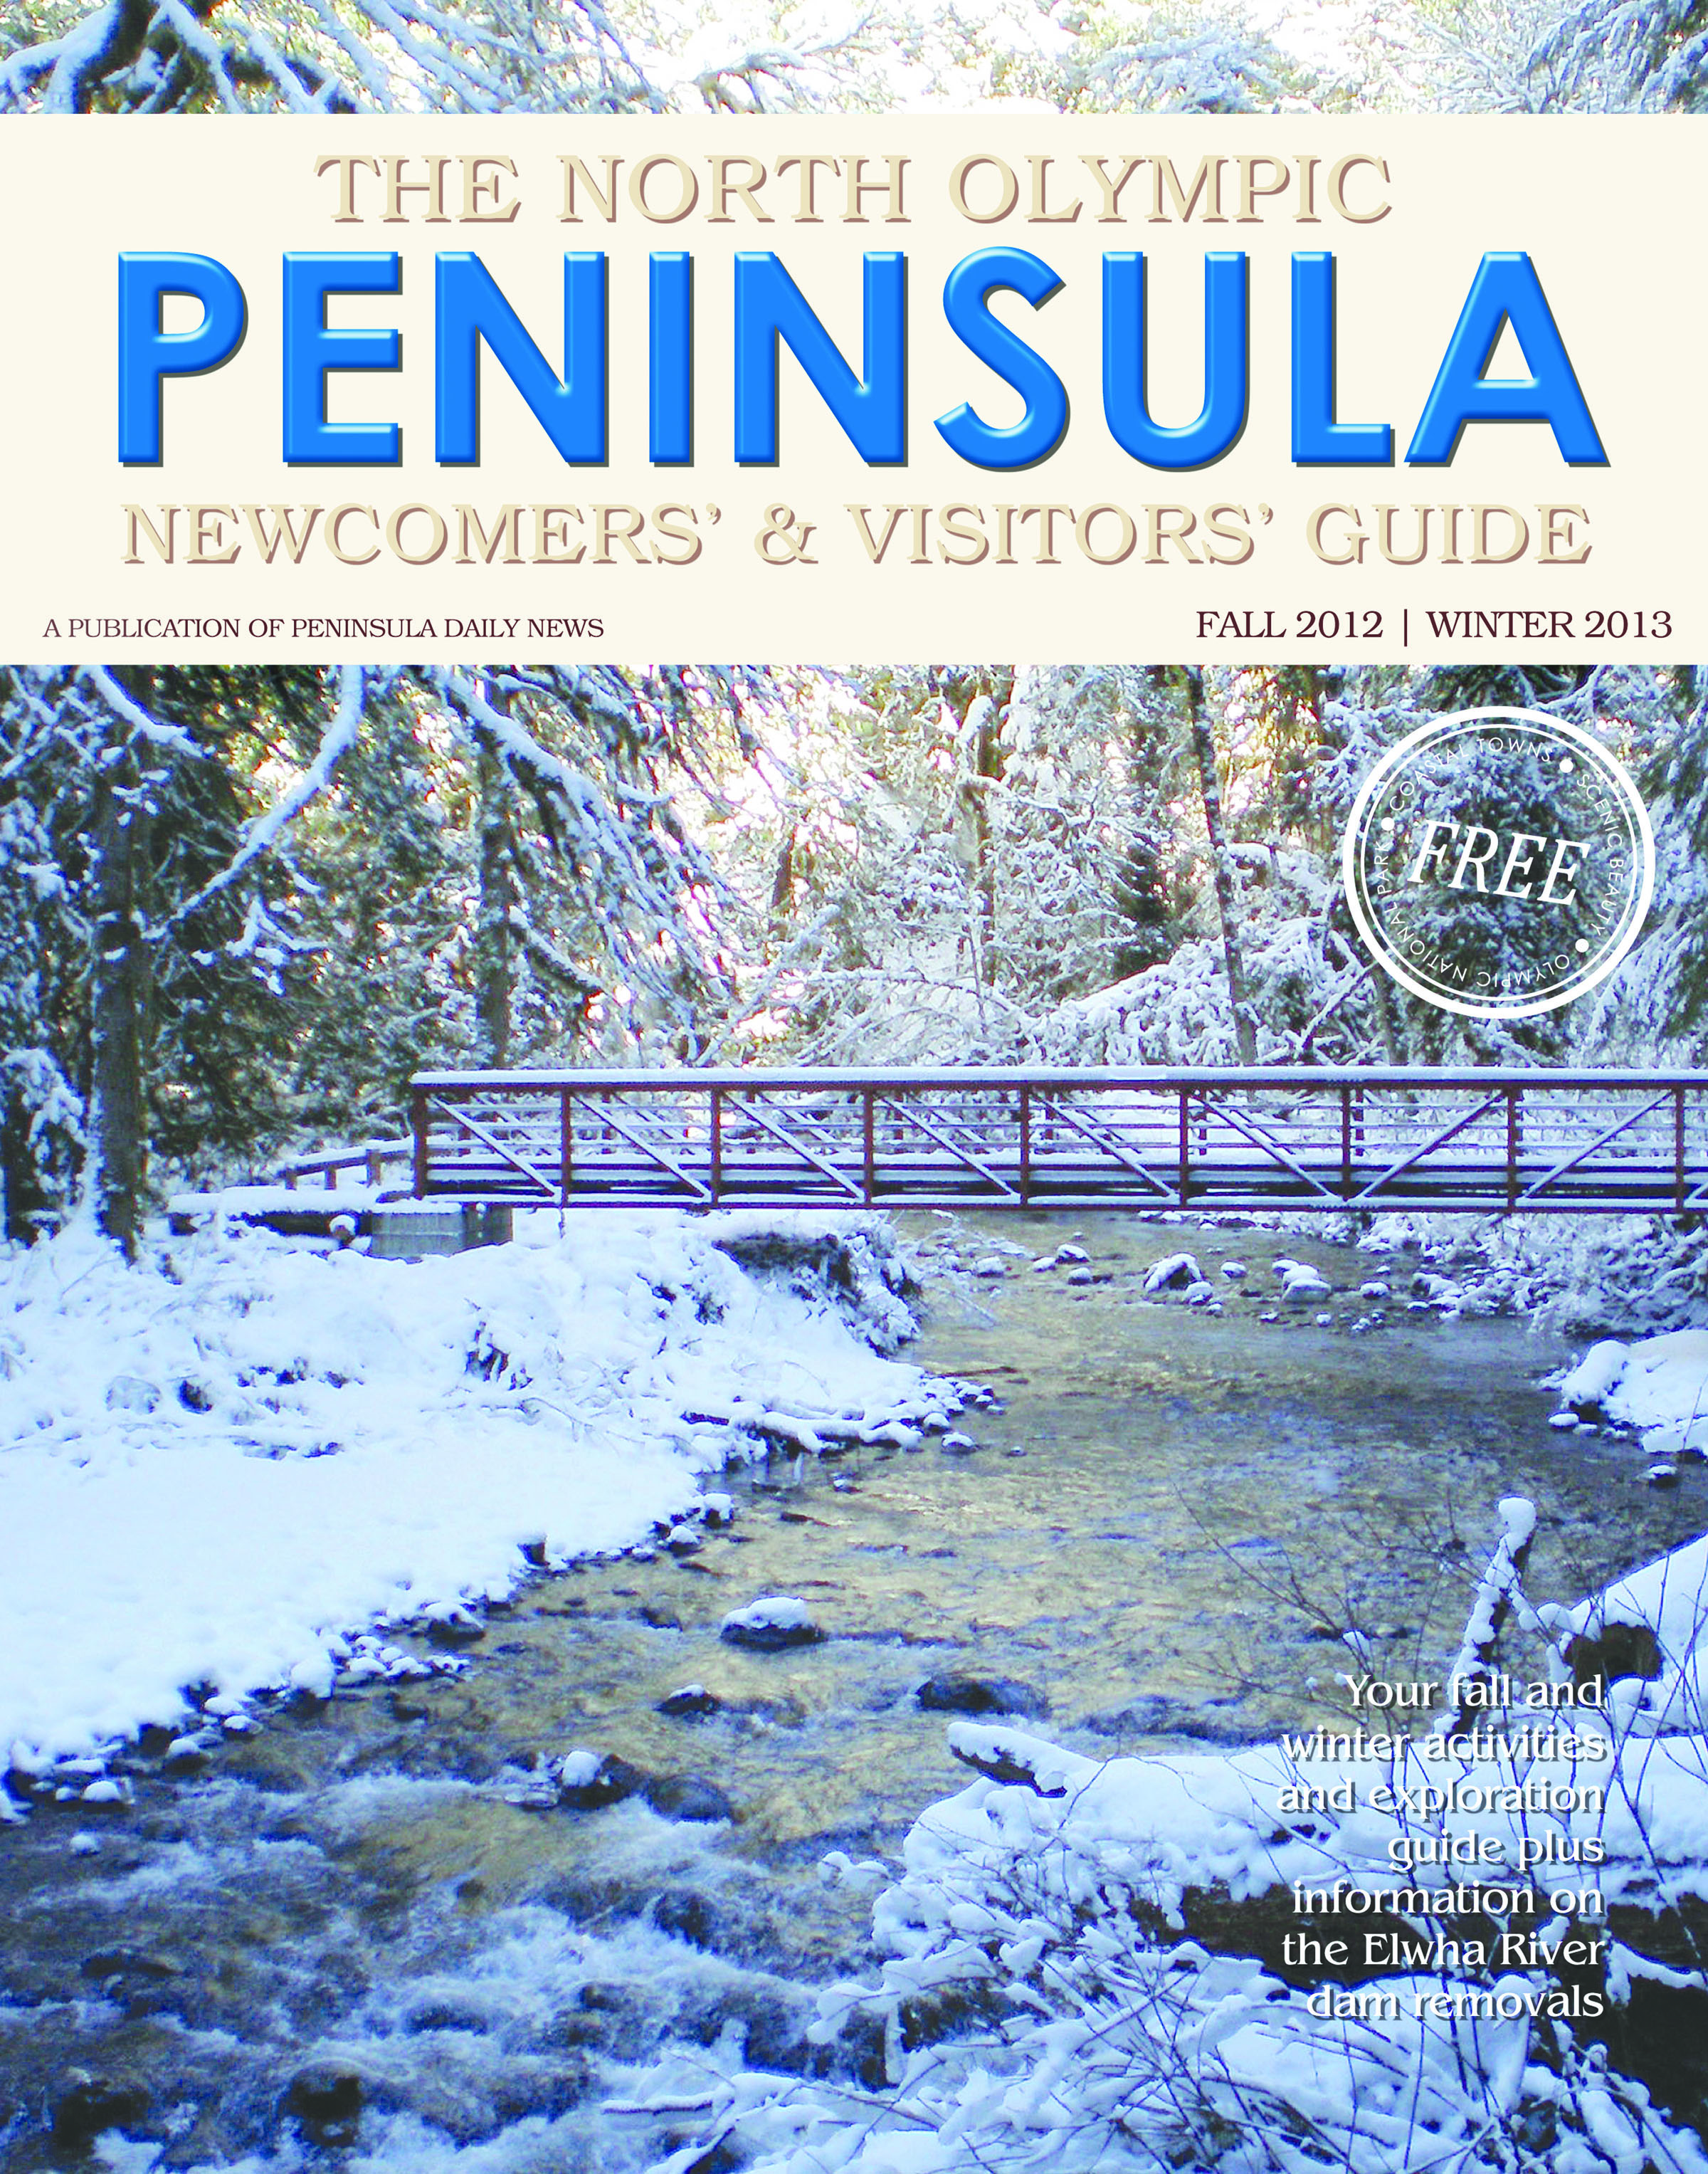 Peninsula Daily News' 2012 North Olympic Peninsula Newcomers' and Visitors' Guide